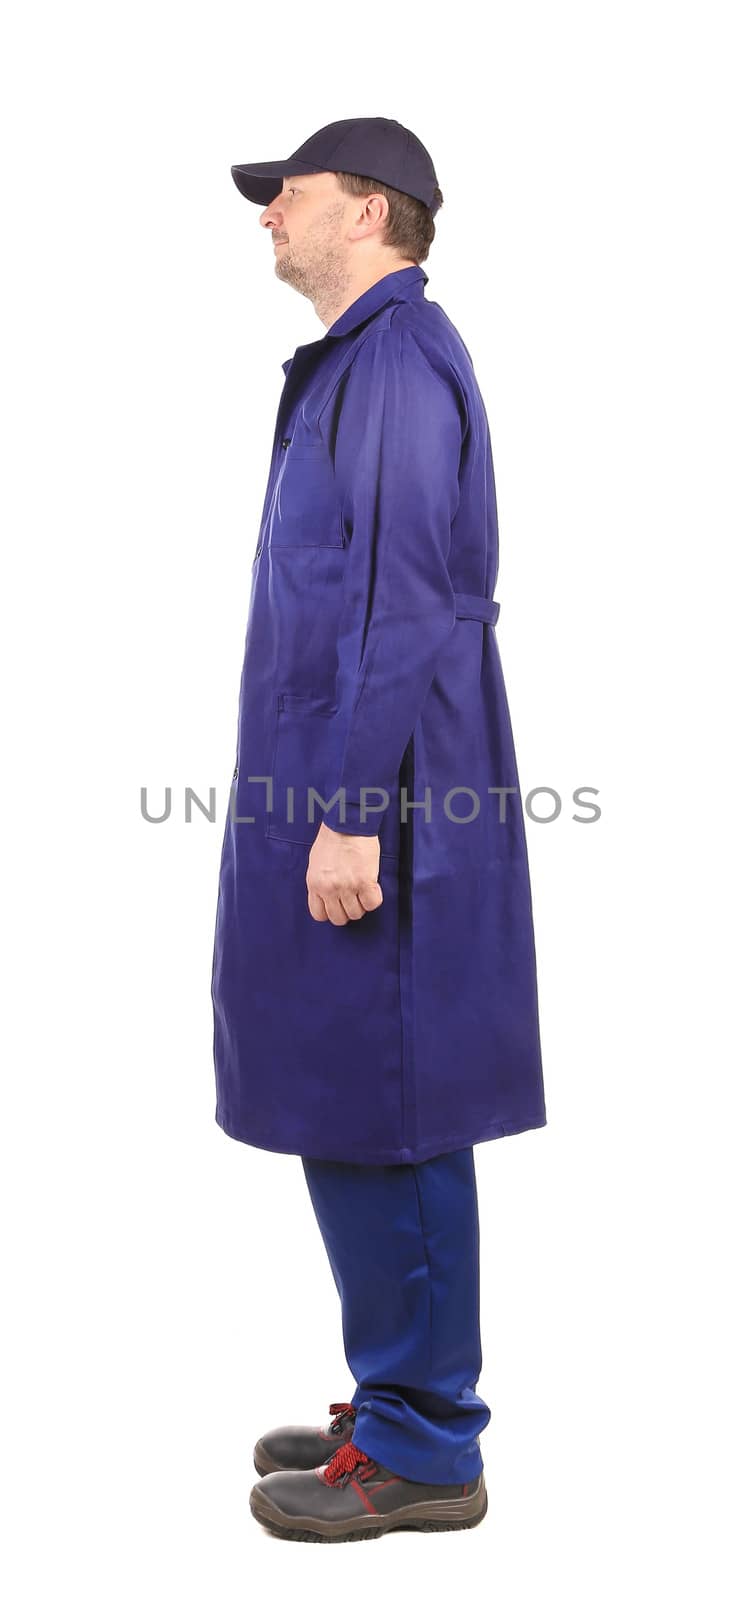 Worker wearing long robe. Isolated on a white background.